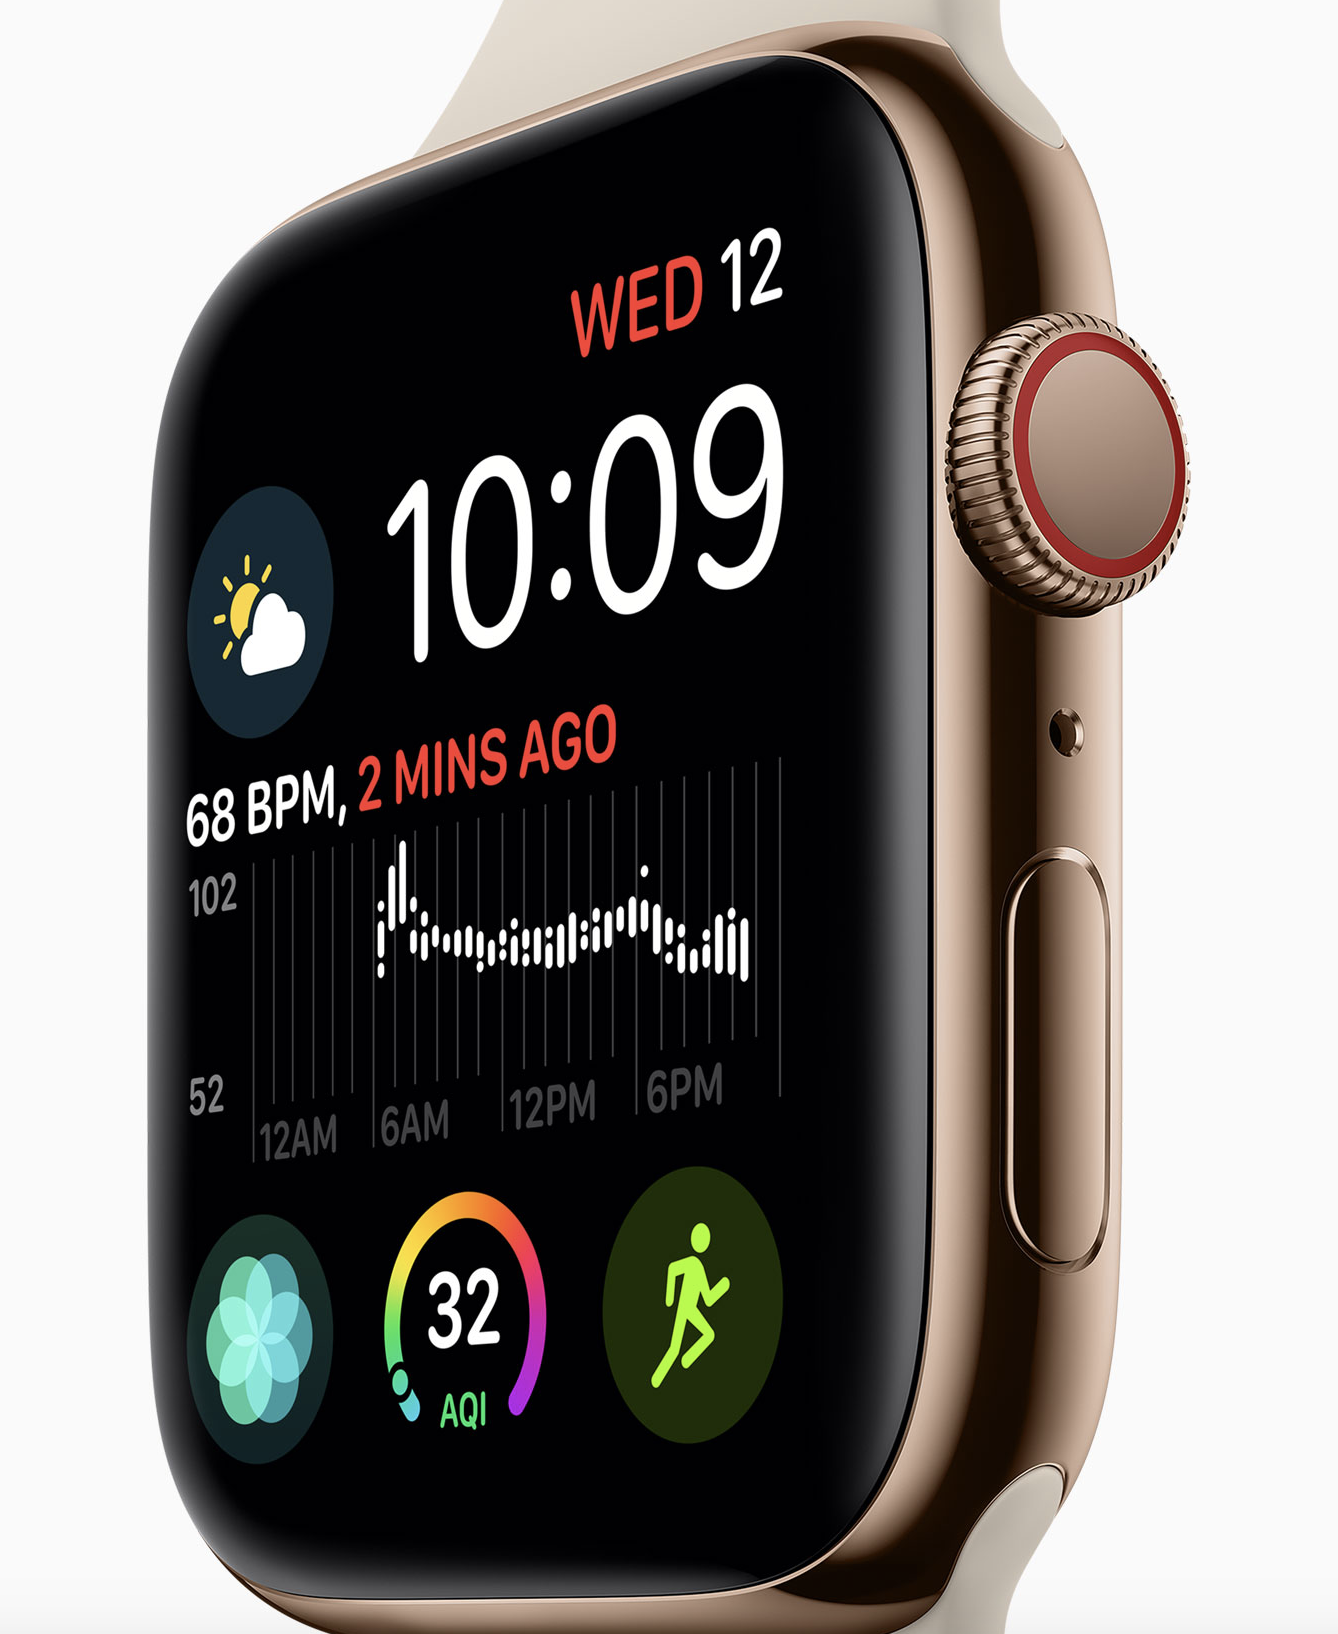 Series 4 Watch Could Grow Apple’s TAM and its ASP